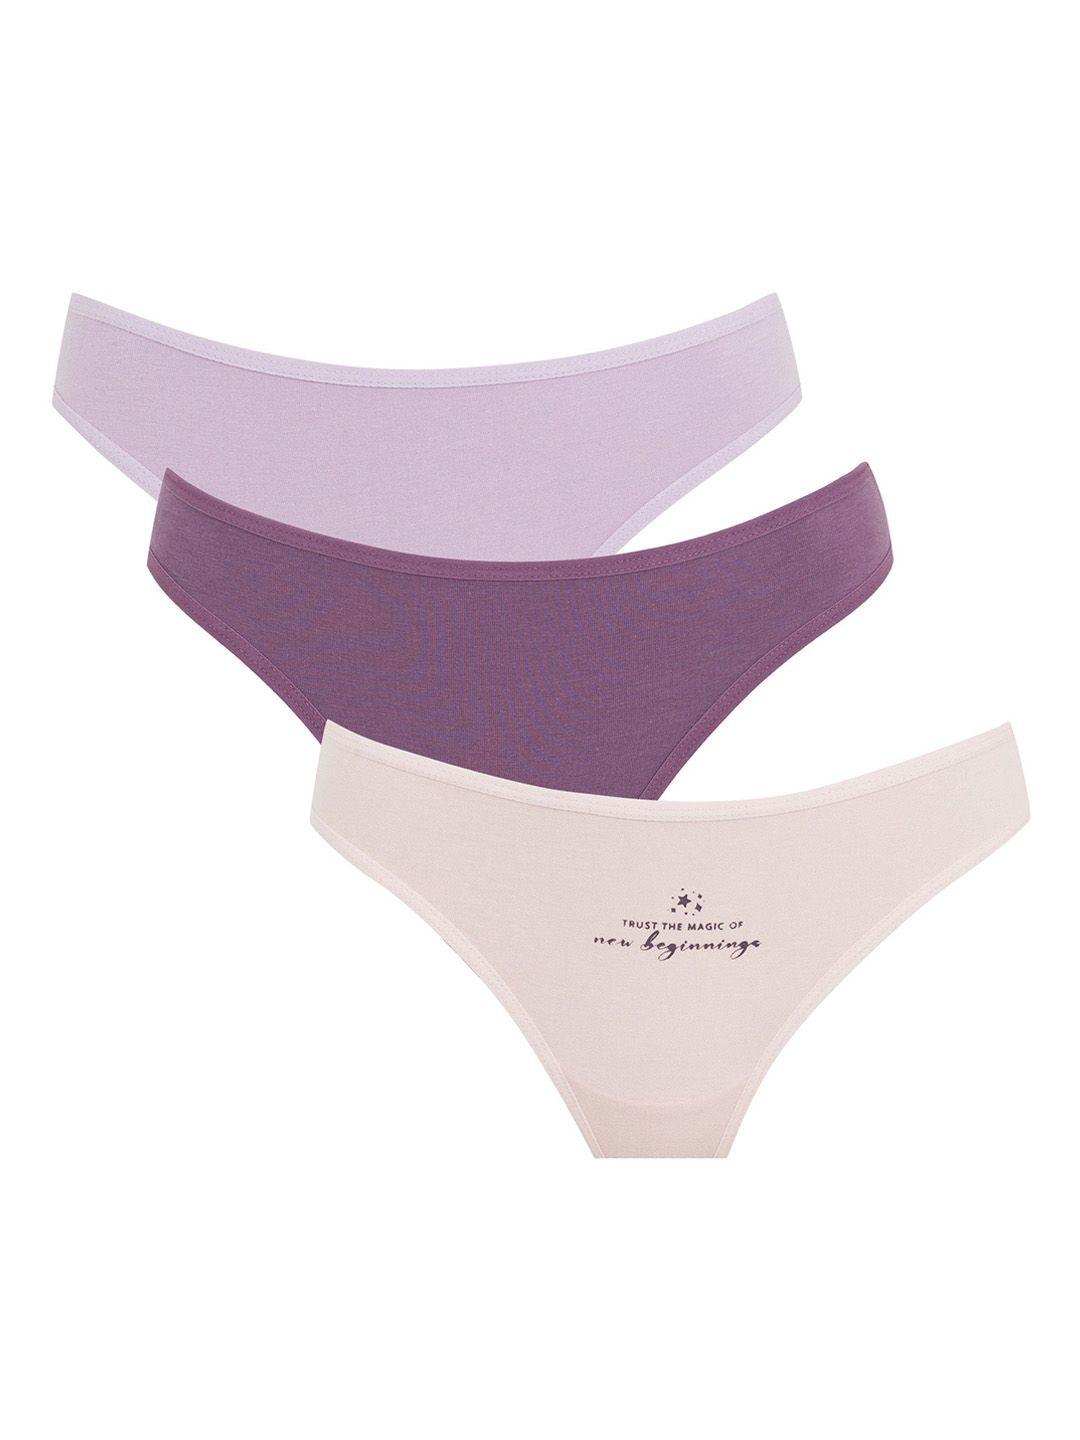 defacto pack of 3 mid-rise basic briefs 233448651